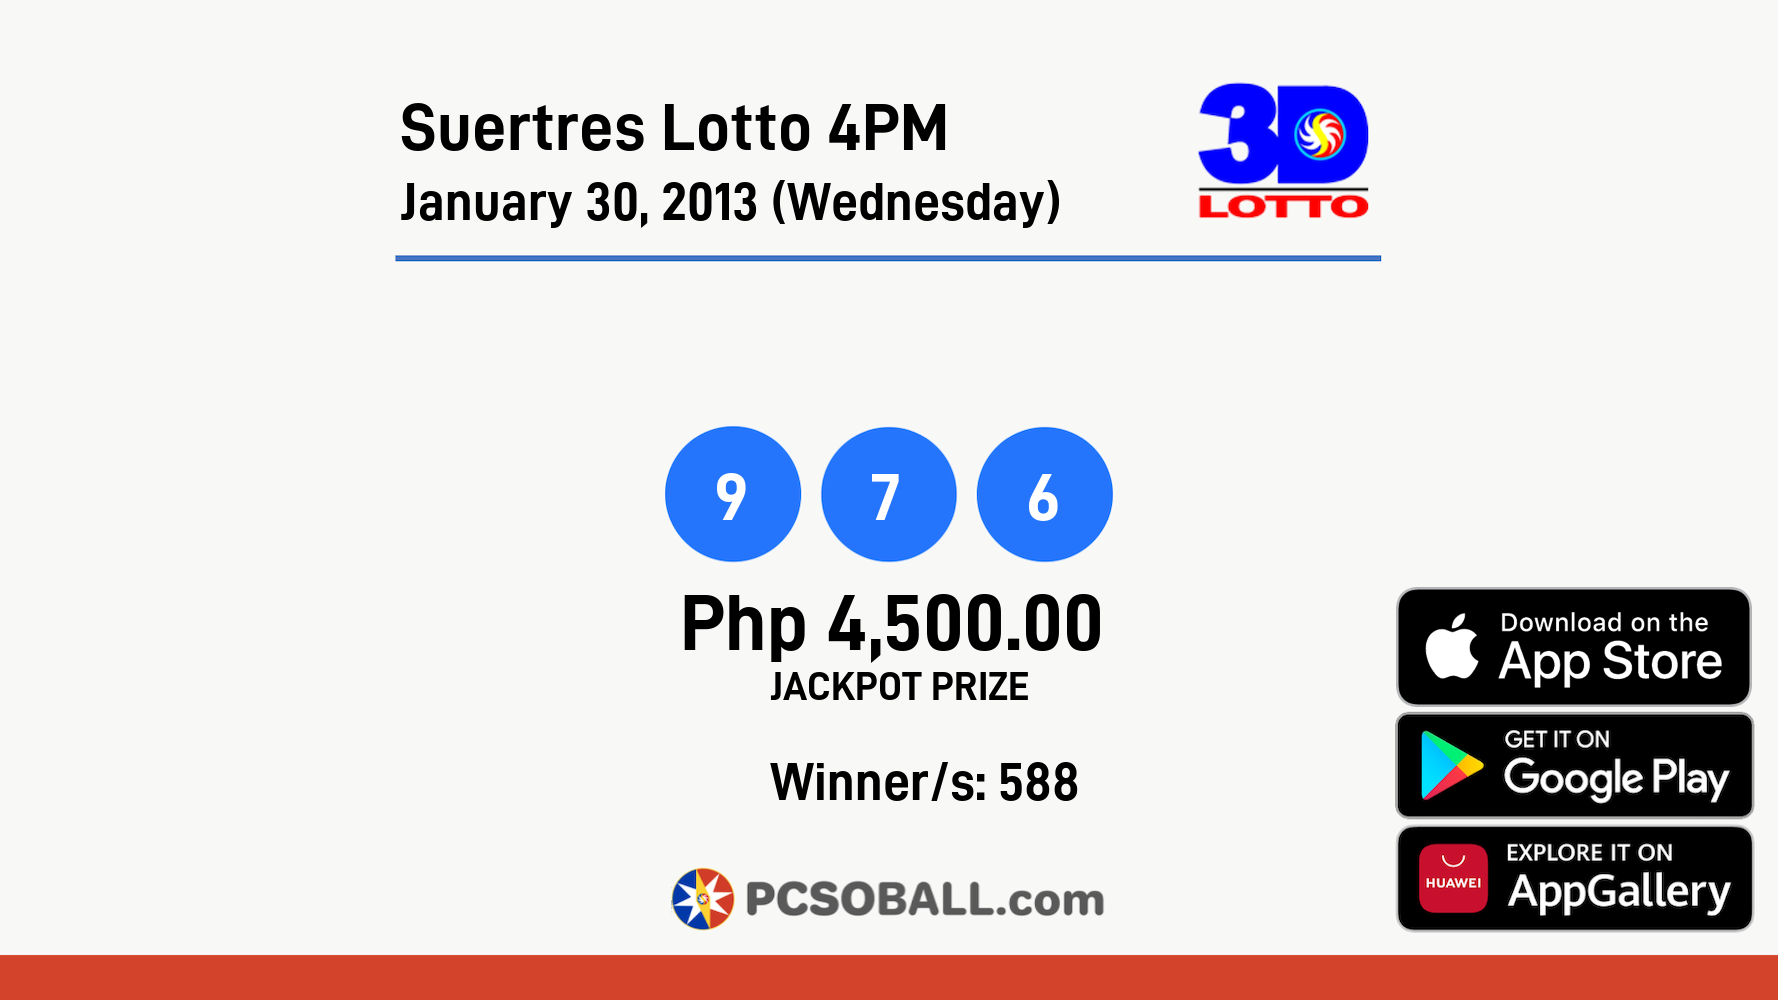 Suertres Lotto 4PM January 30, 2013 (Wednesday) Result